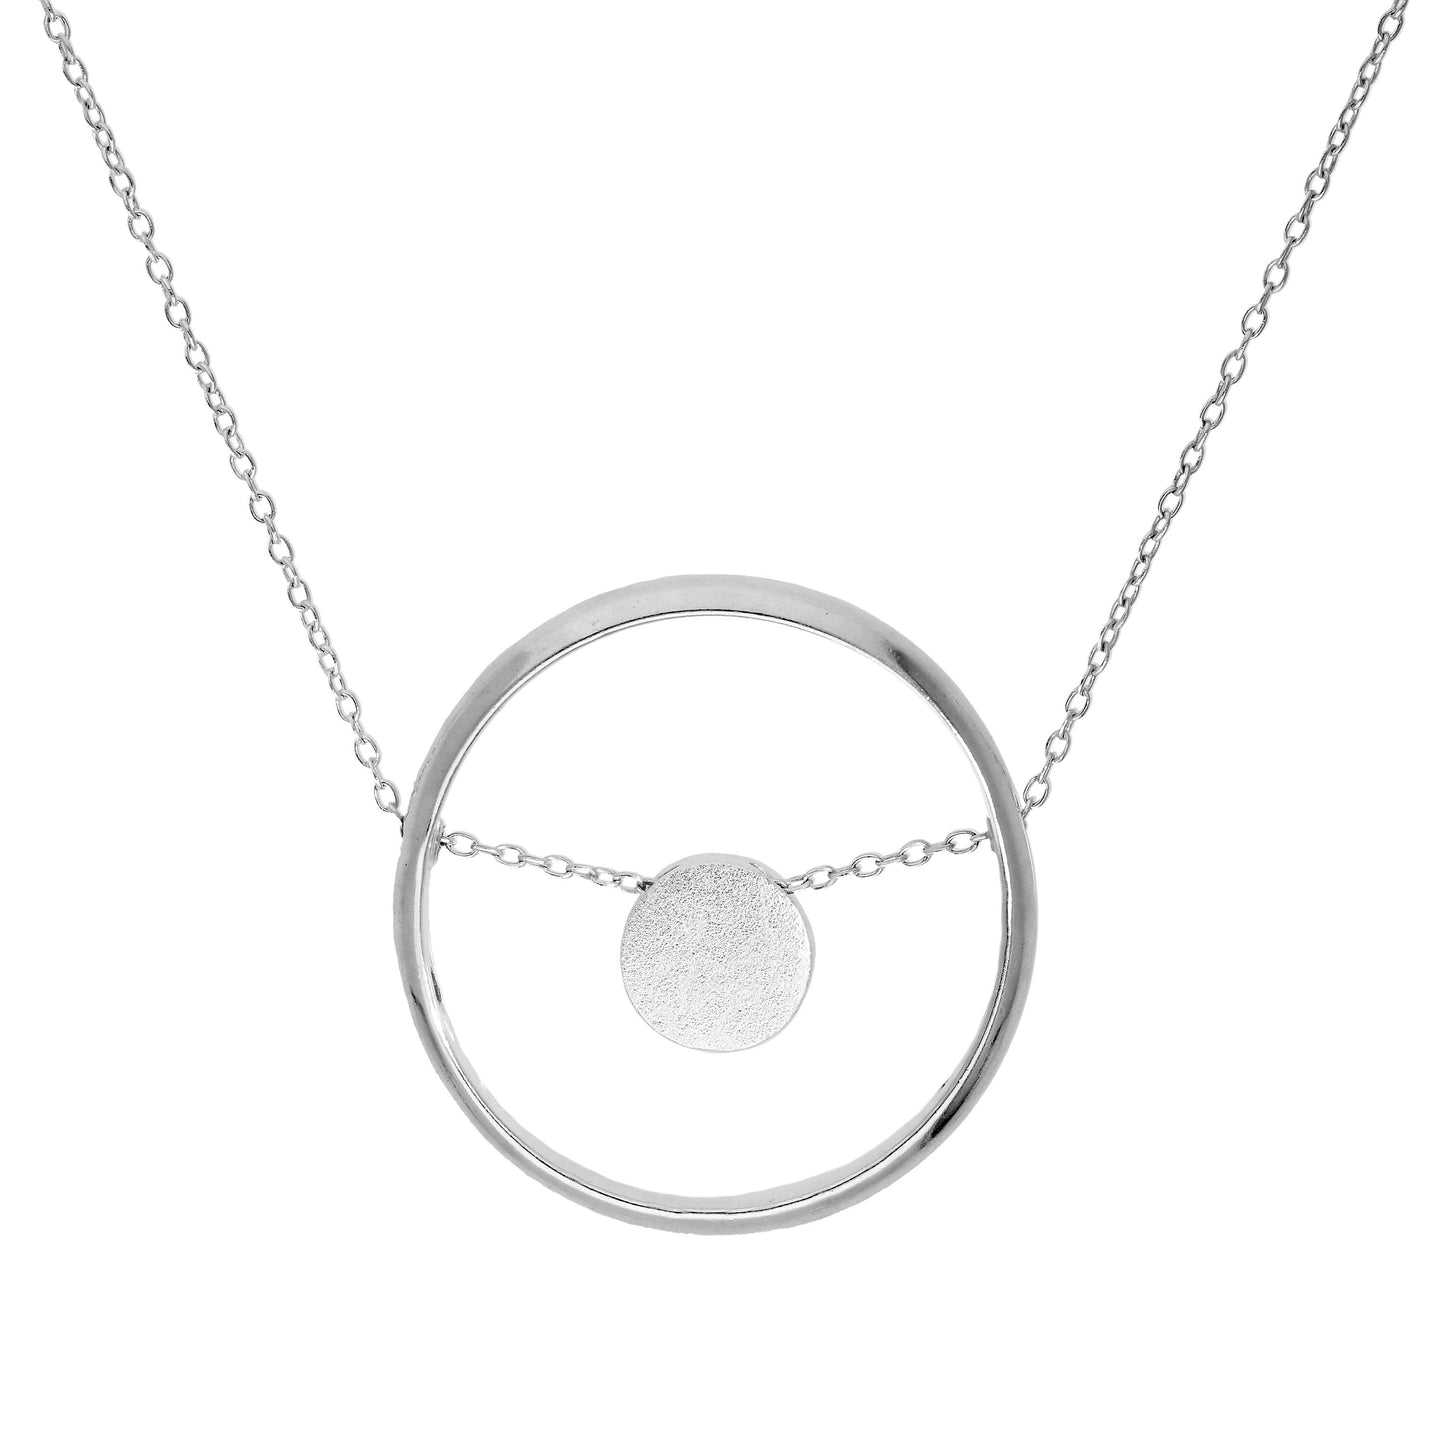 Sterling Silver Karma Moments Bead & Ring Pendant on Belcher Chain 16-22 Inches